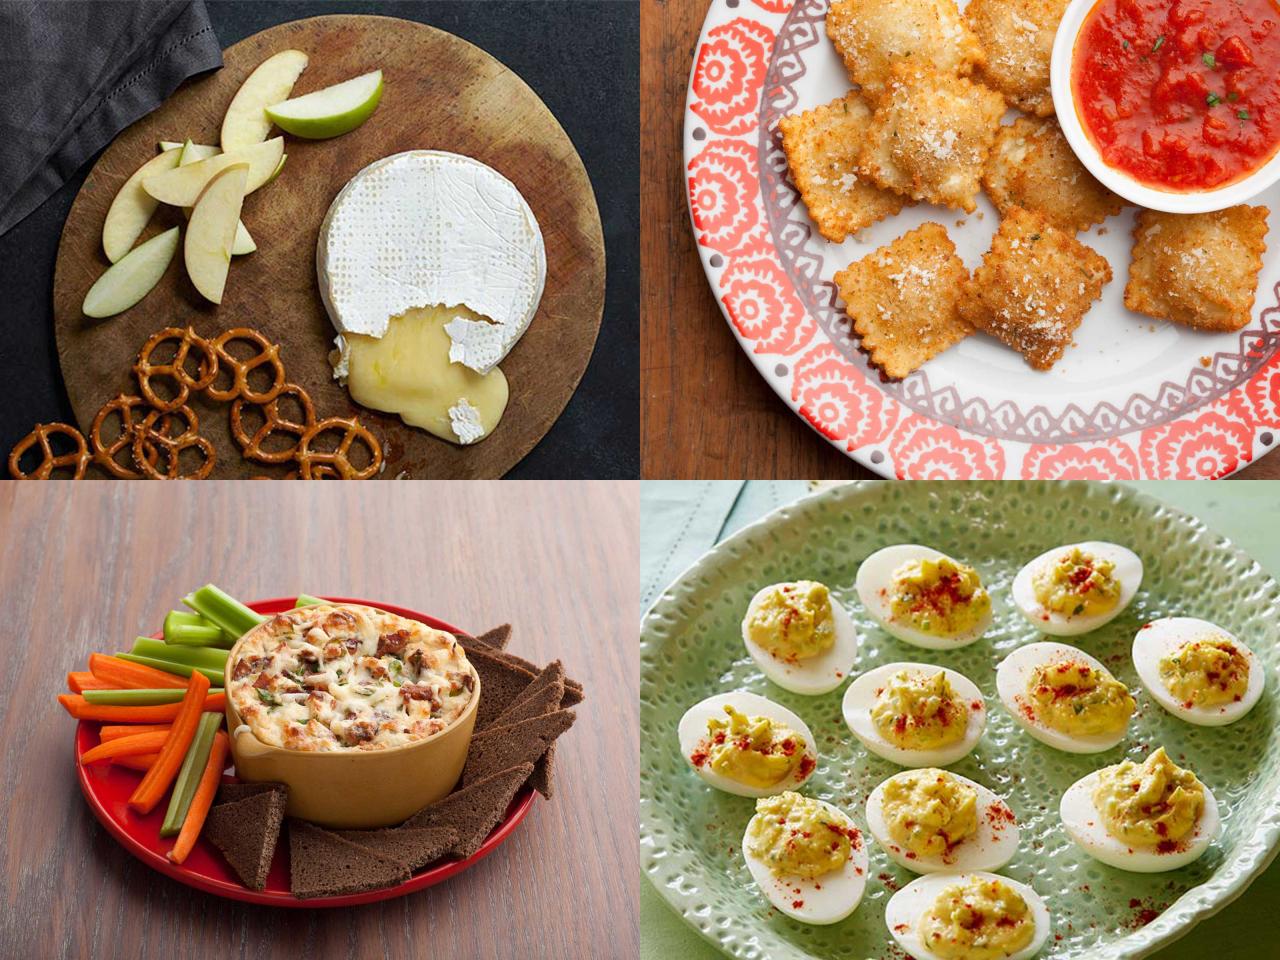 Best Thanksgiving Appetizers | FN Dish - Behind-the-Scenes, Food Trends ...